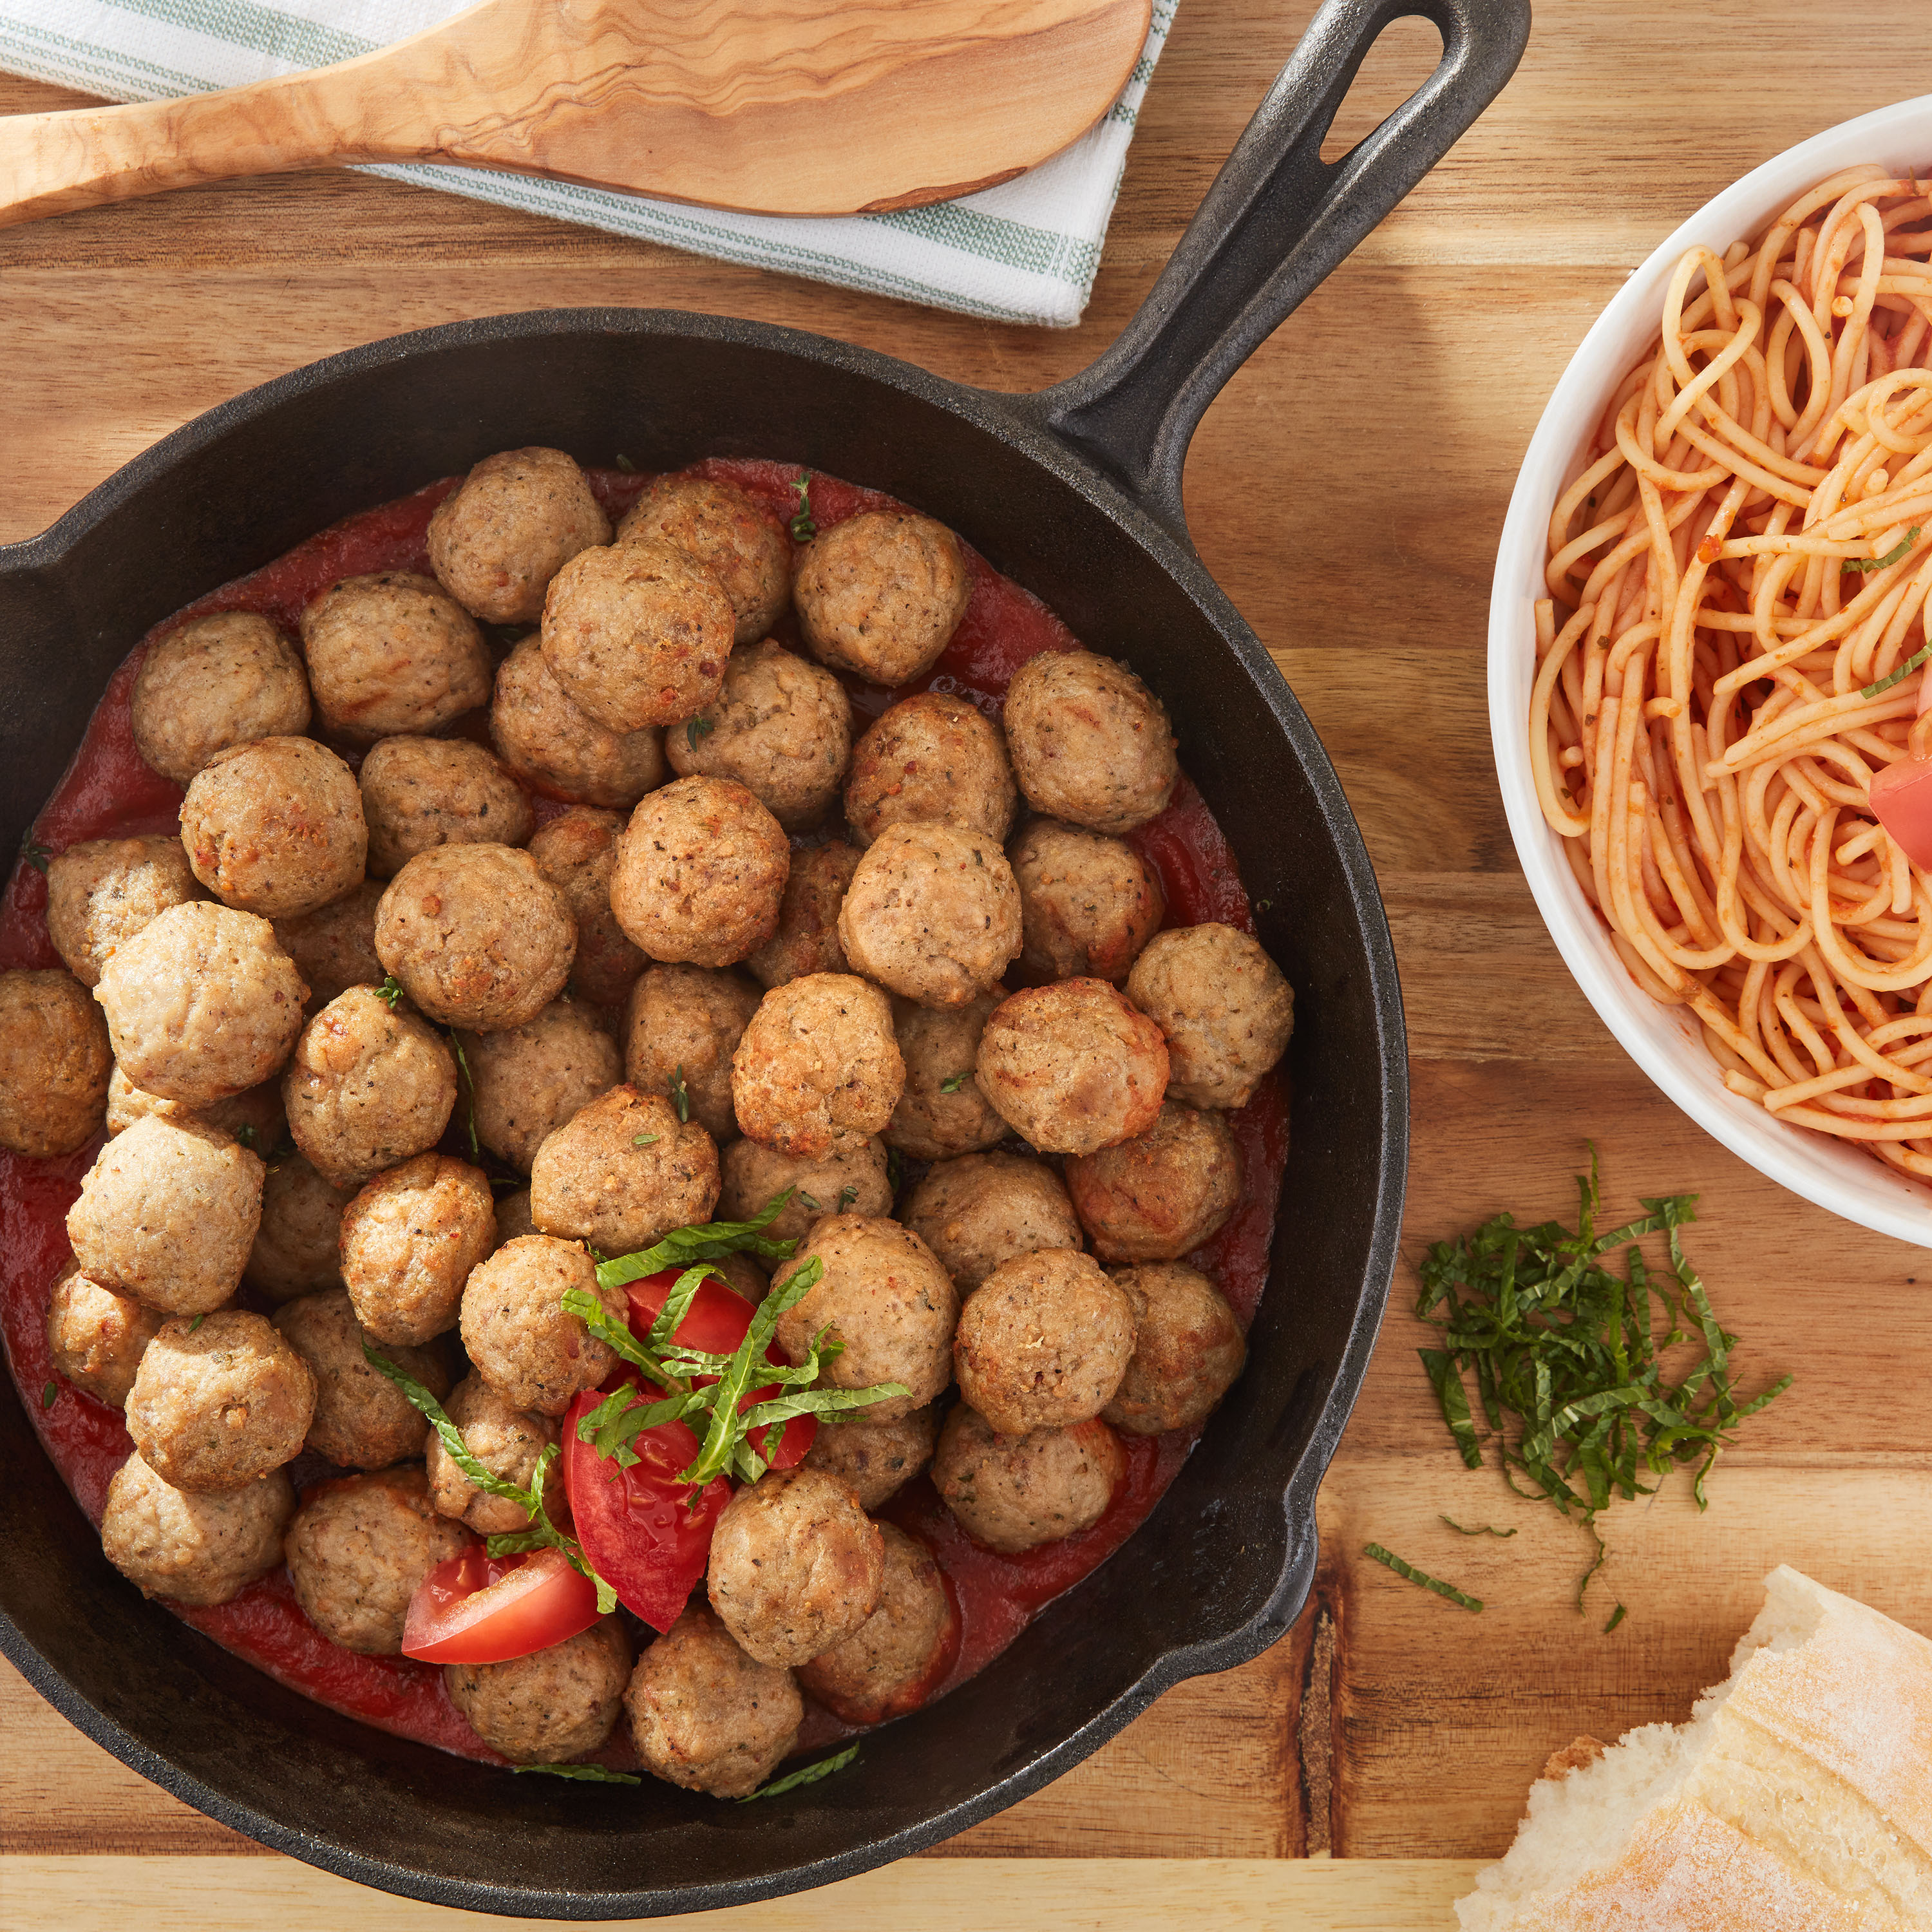 Great Value Fully Cooked Italian Style Meatballs, 32 oz (Frozen) - image 2 of 8